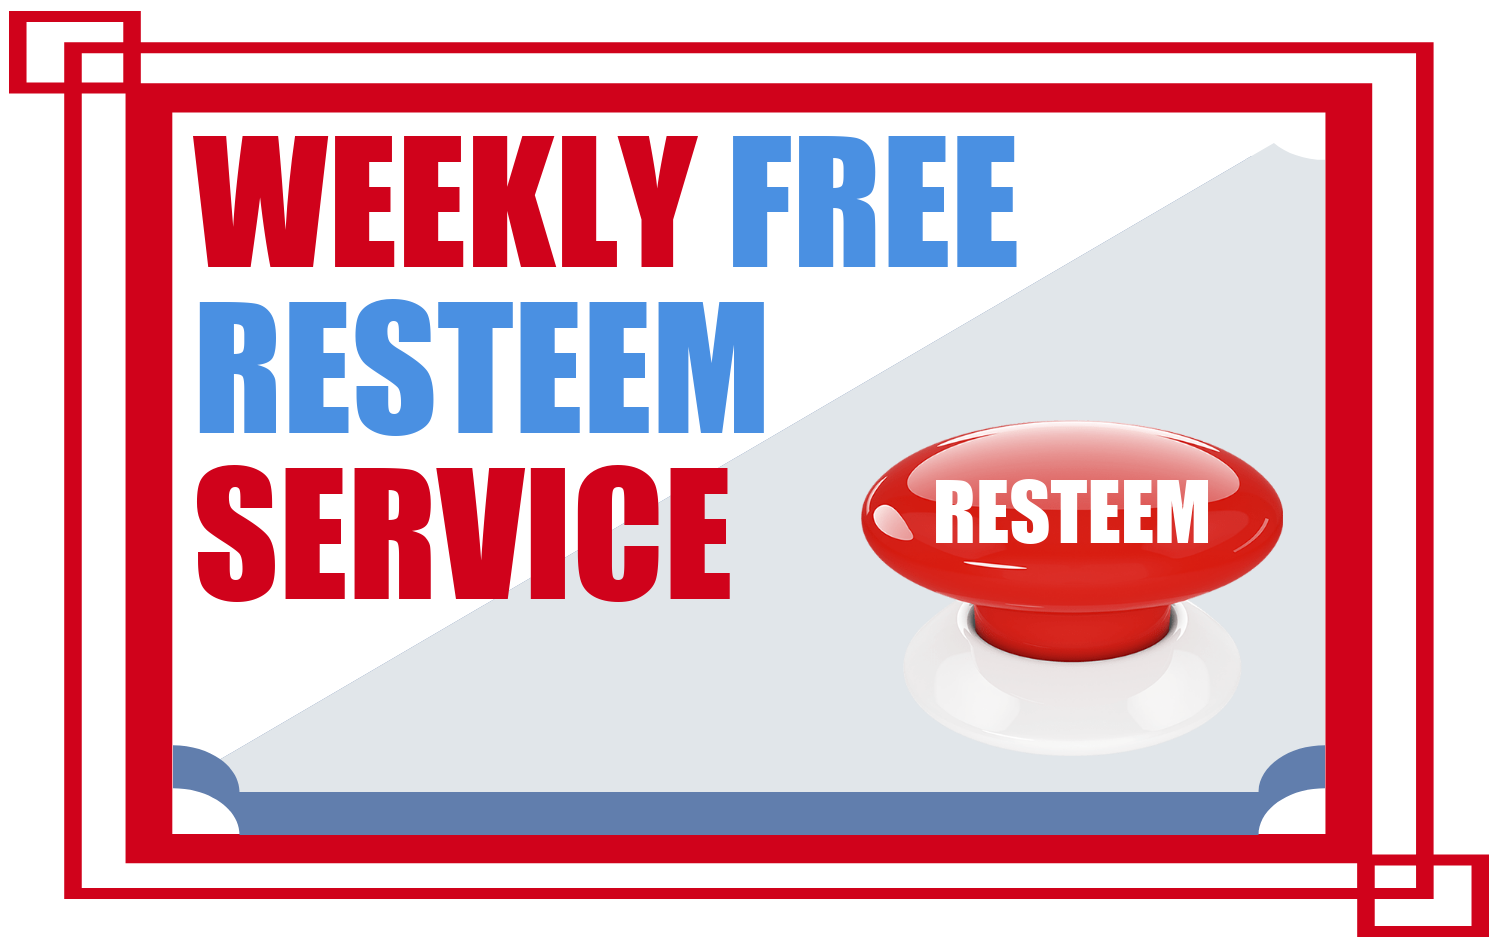 WEEKLY FREE RESTEEM SERVICE by skpjr001.png